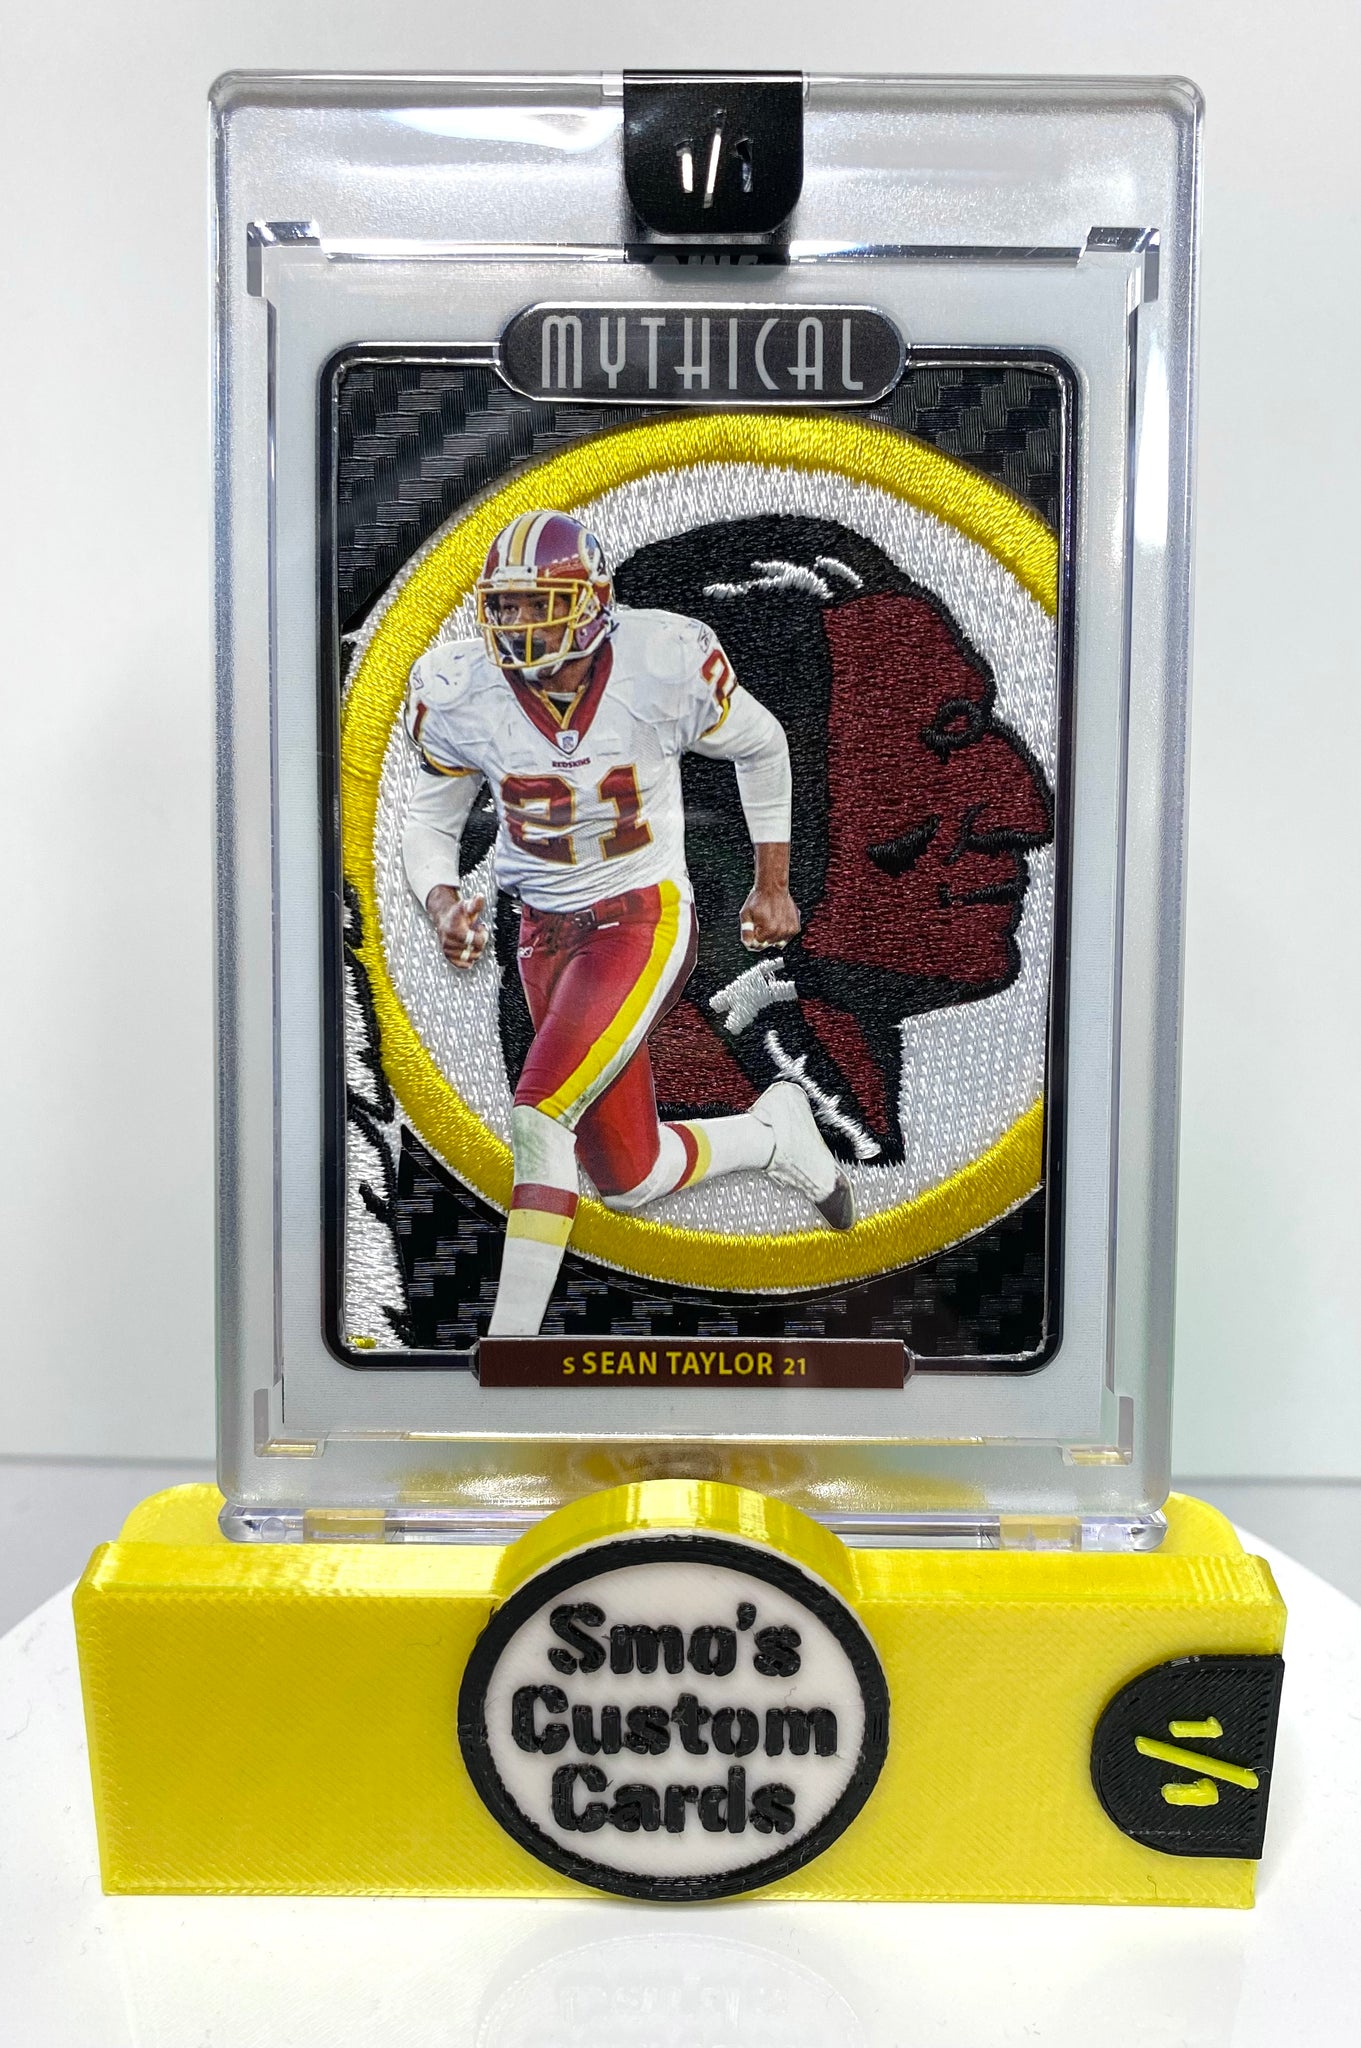 Sean Taylor Mythical Redskins Patch 1/1